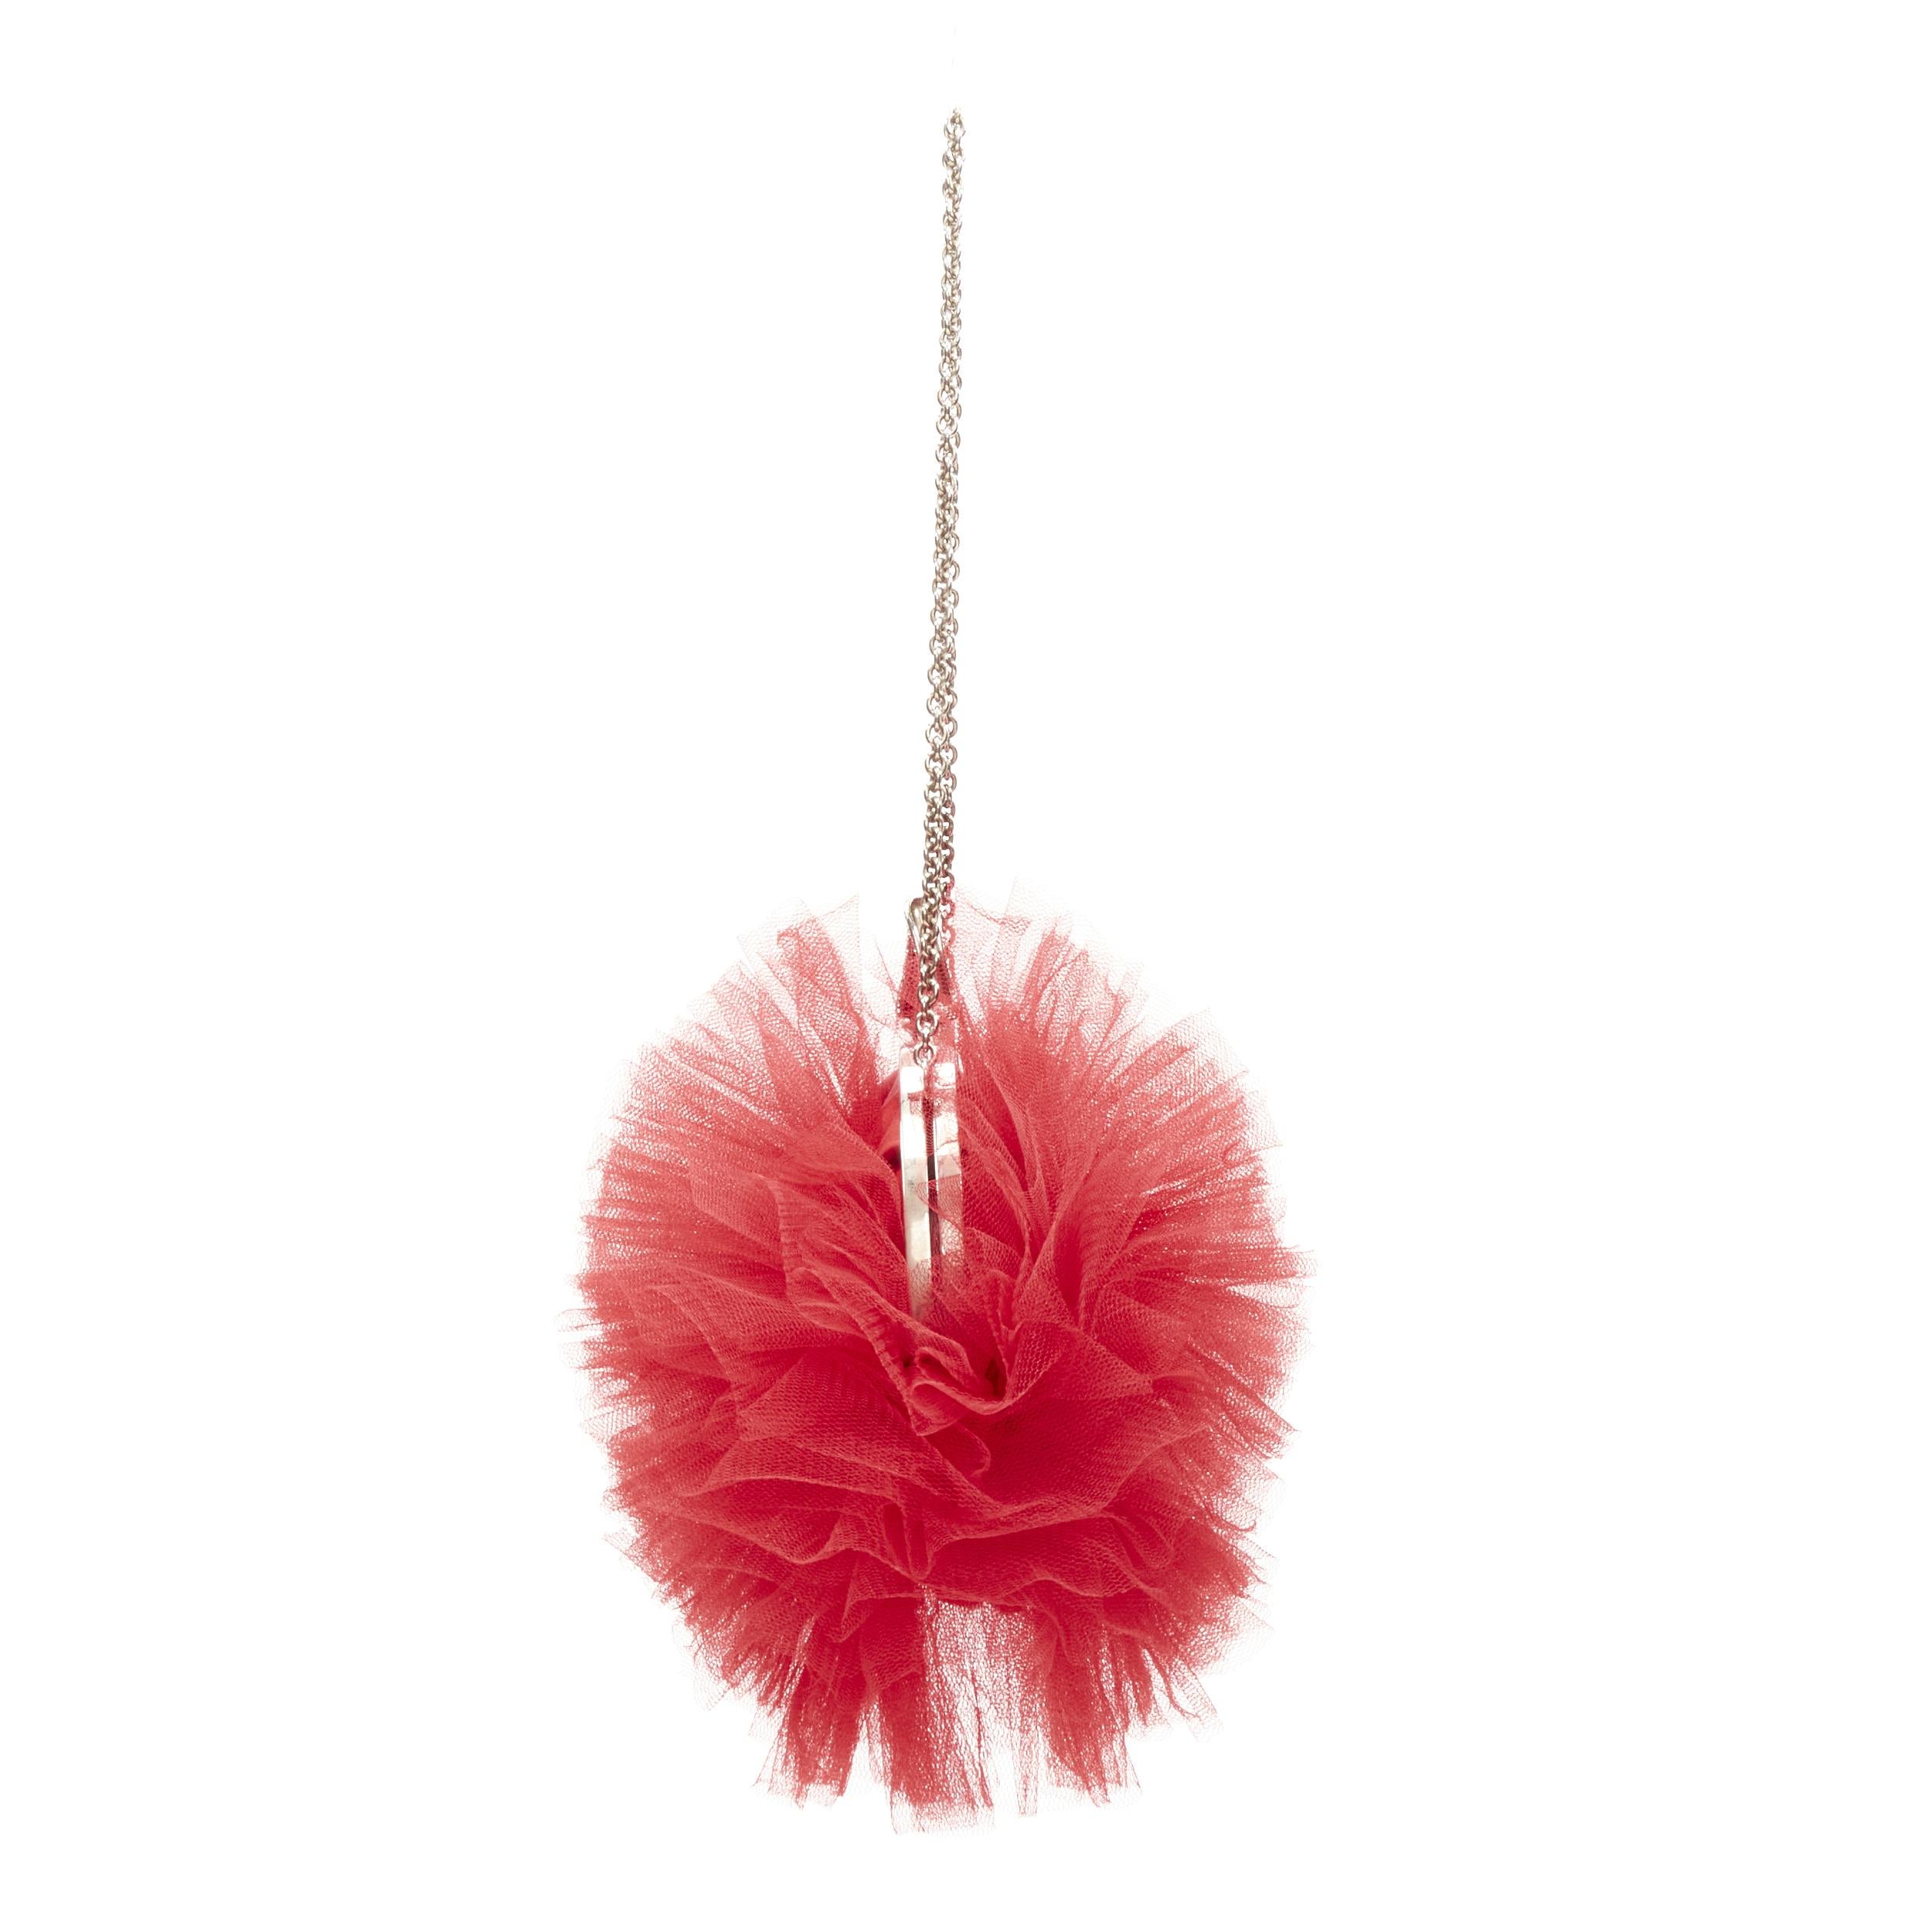 Women's CHRISTIAN LOUBOUTIN Tutulle red tulle strass crystal heel clasp clutch bag For Sale